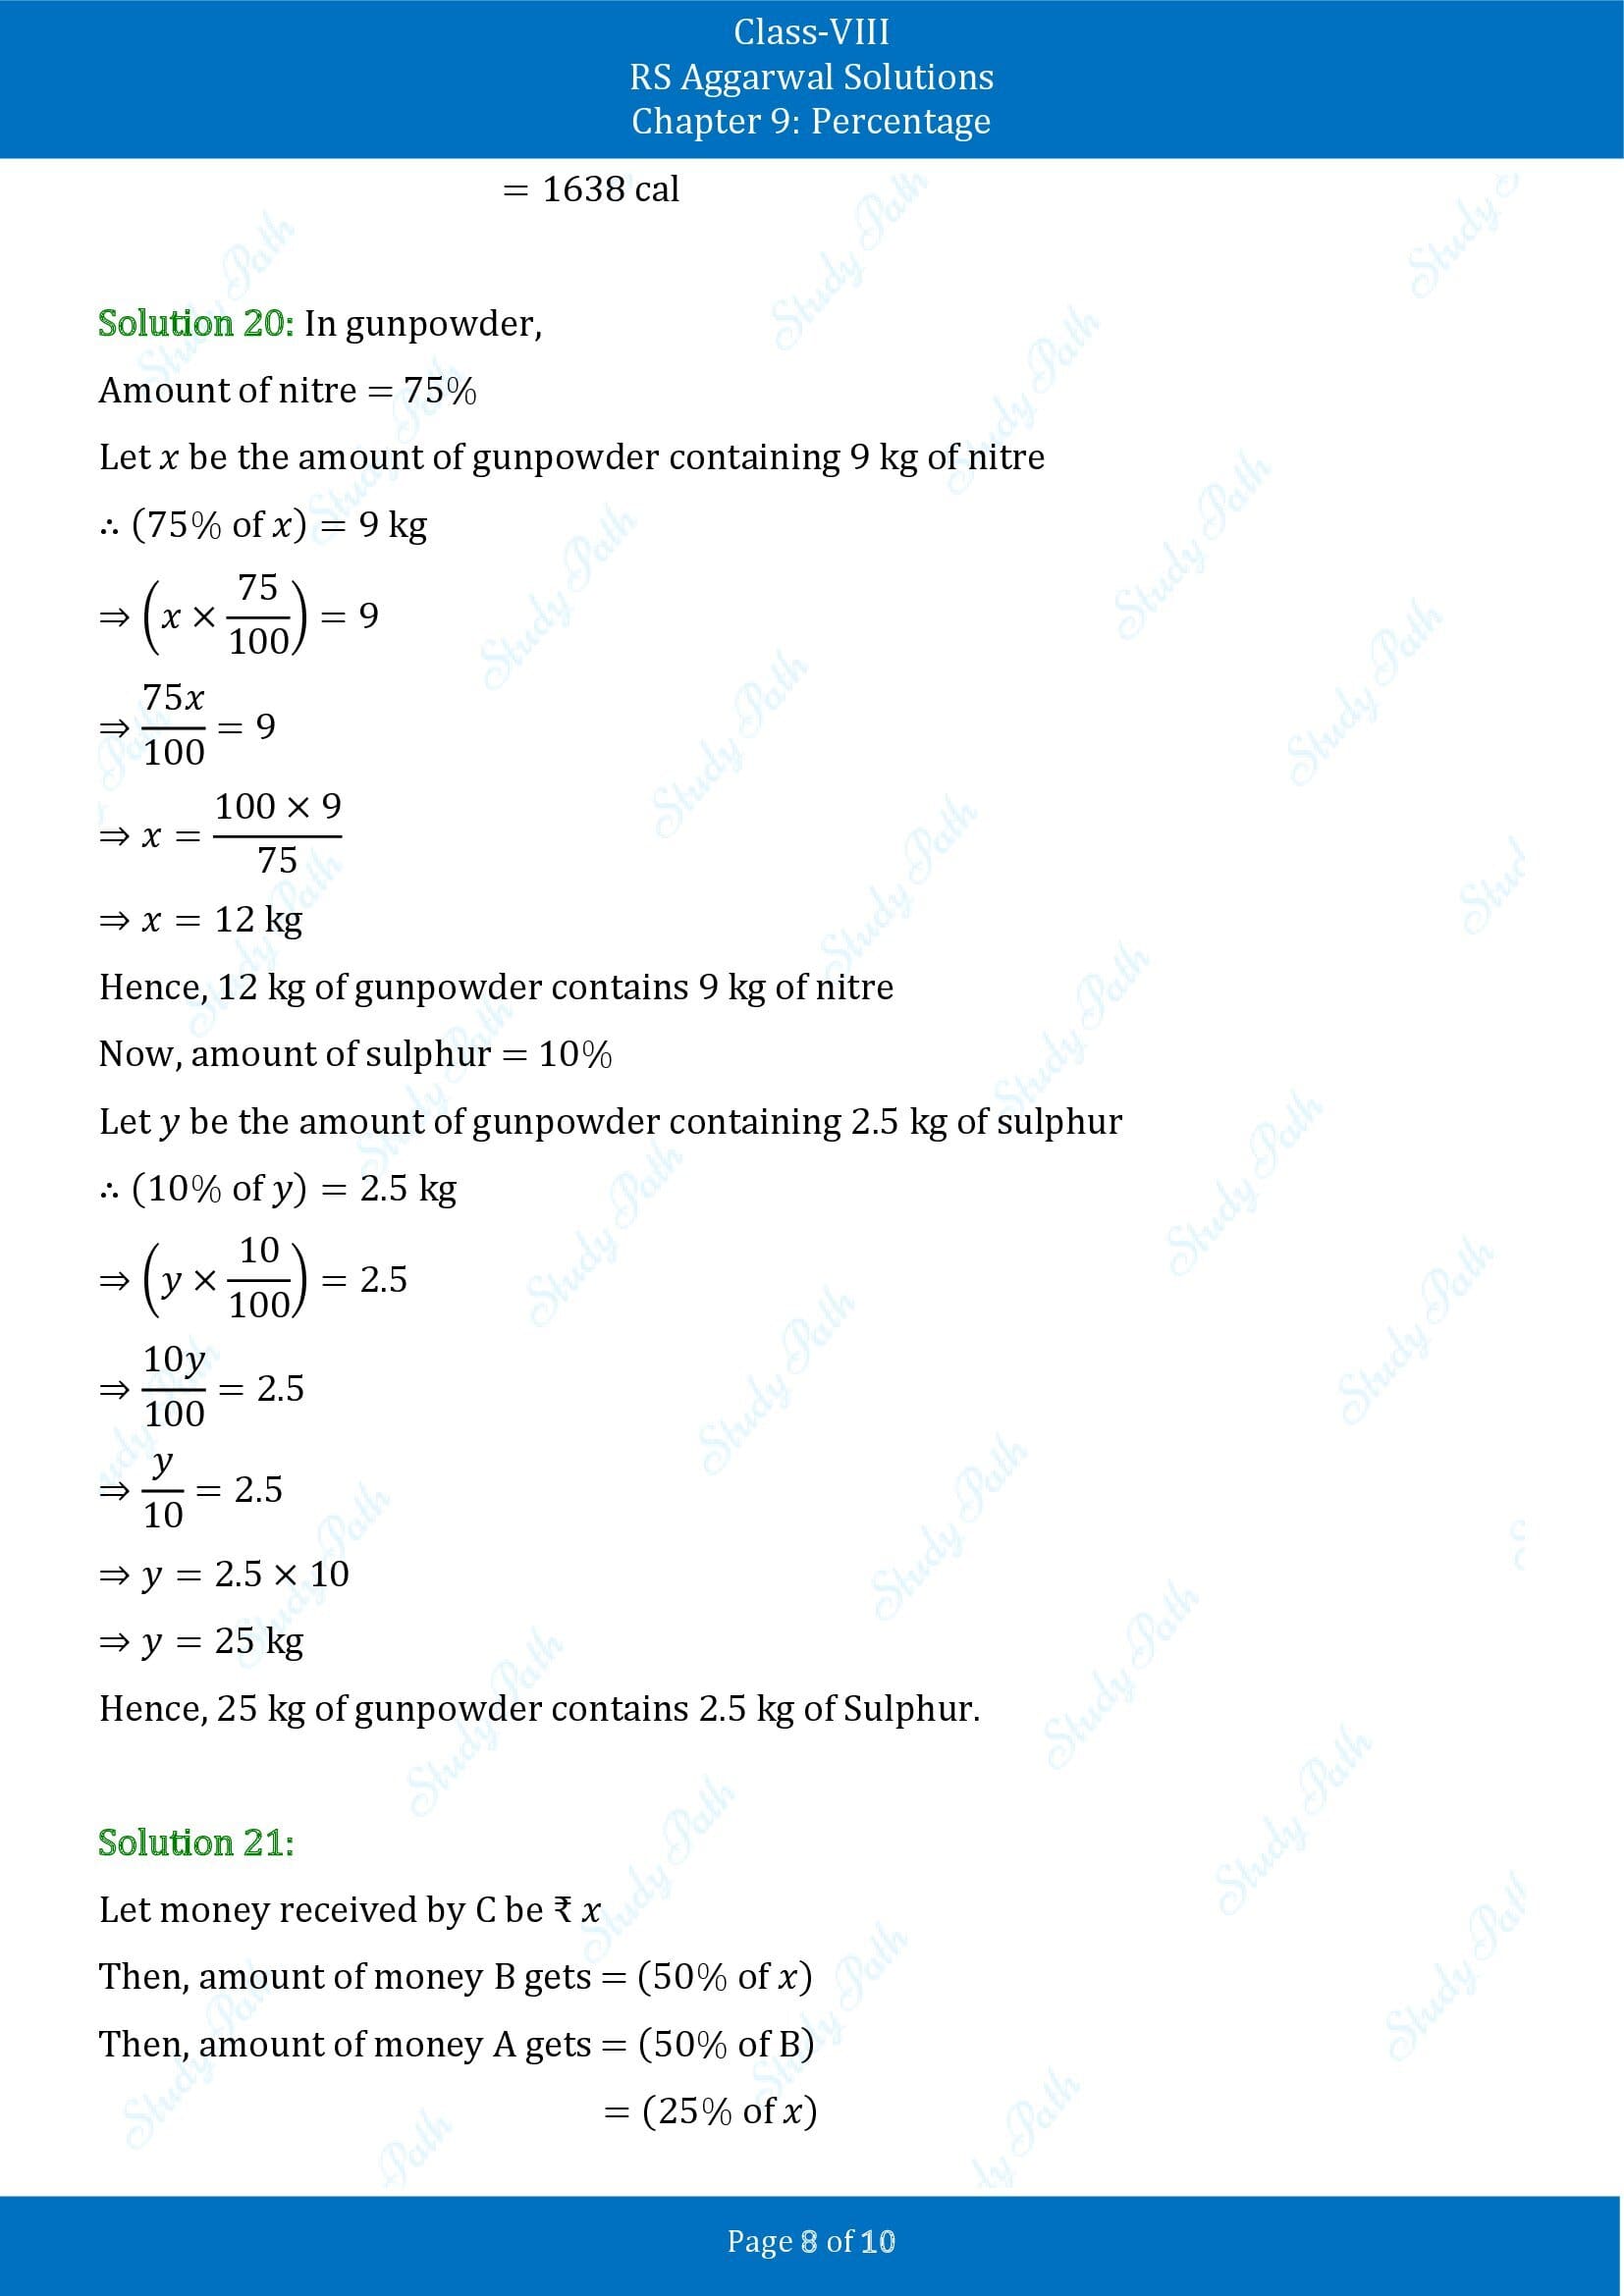 RS Aggarwal Solutions Class 8 Chapter 9 Percentage Exercise 9A 00008